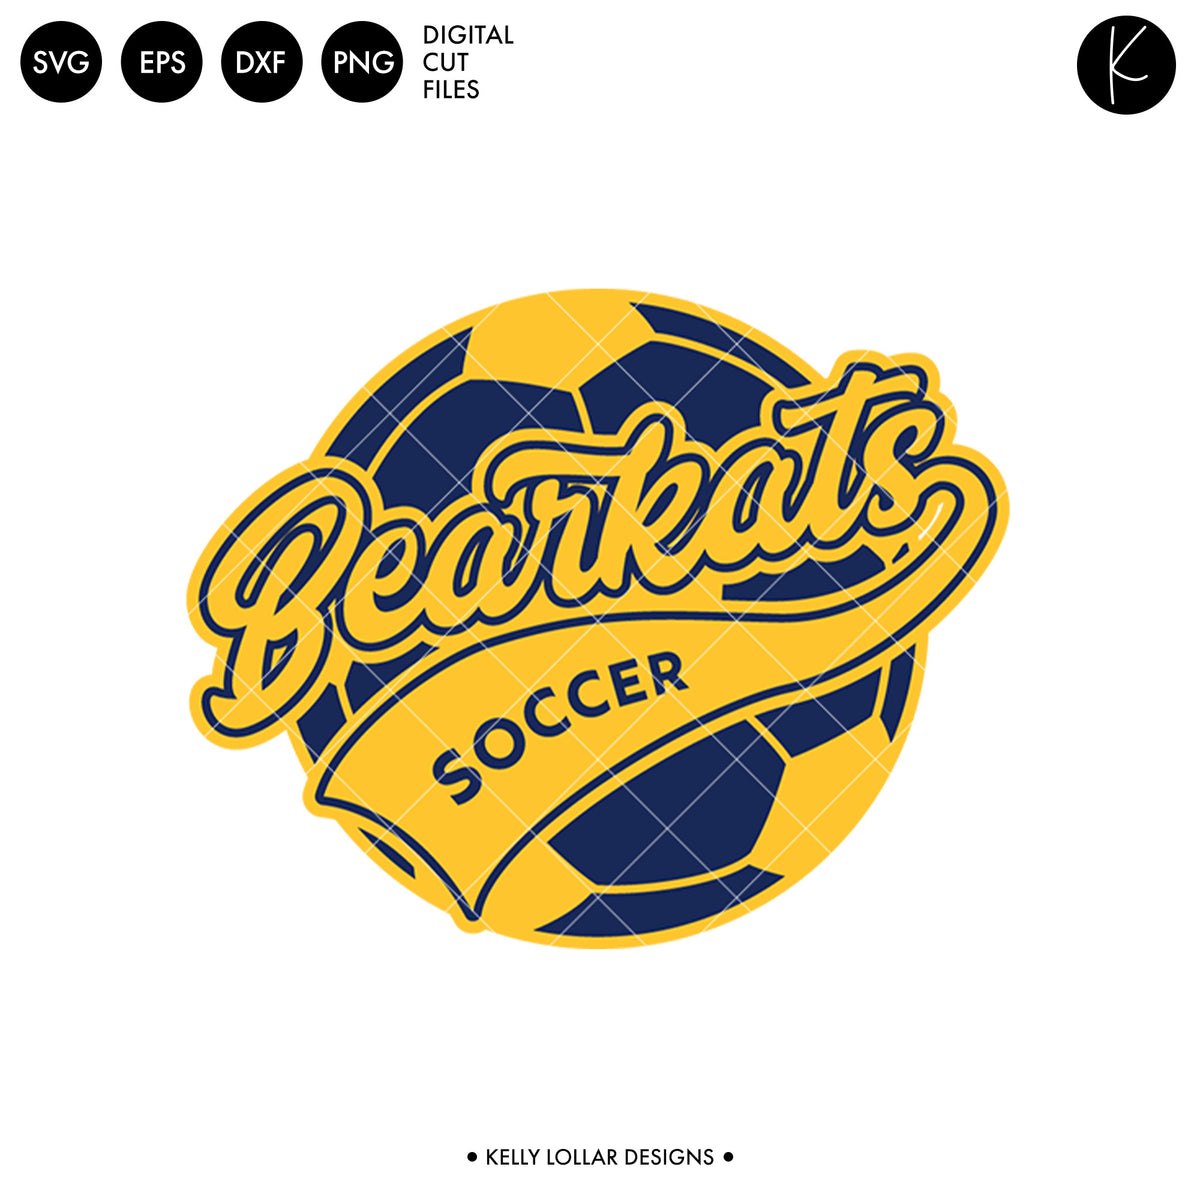 Bearkats Soccer and Football Bundle | SVG DXF EPS PNG Cut Files